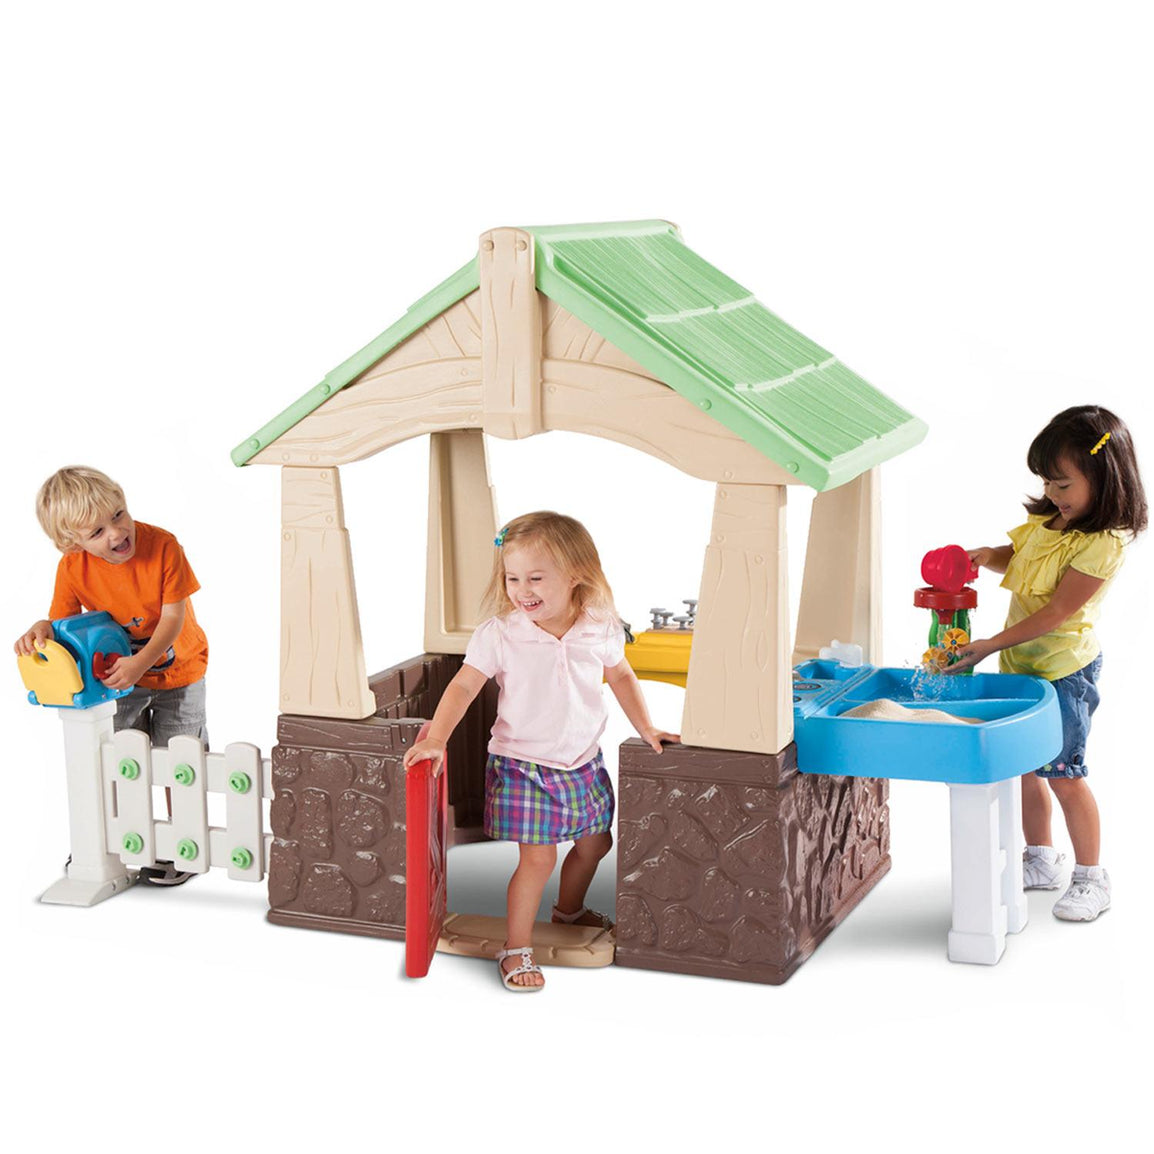 Playhouse is an open design with multiple play areas